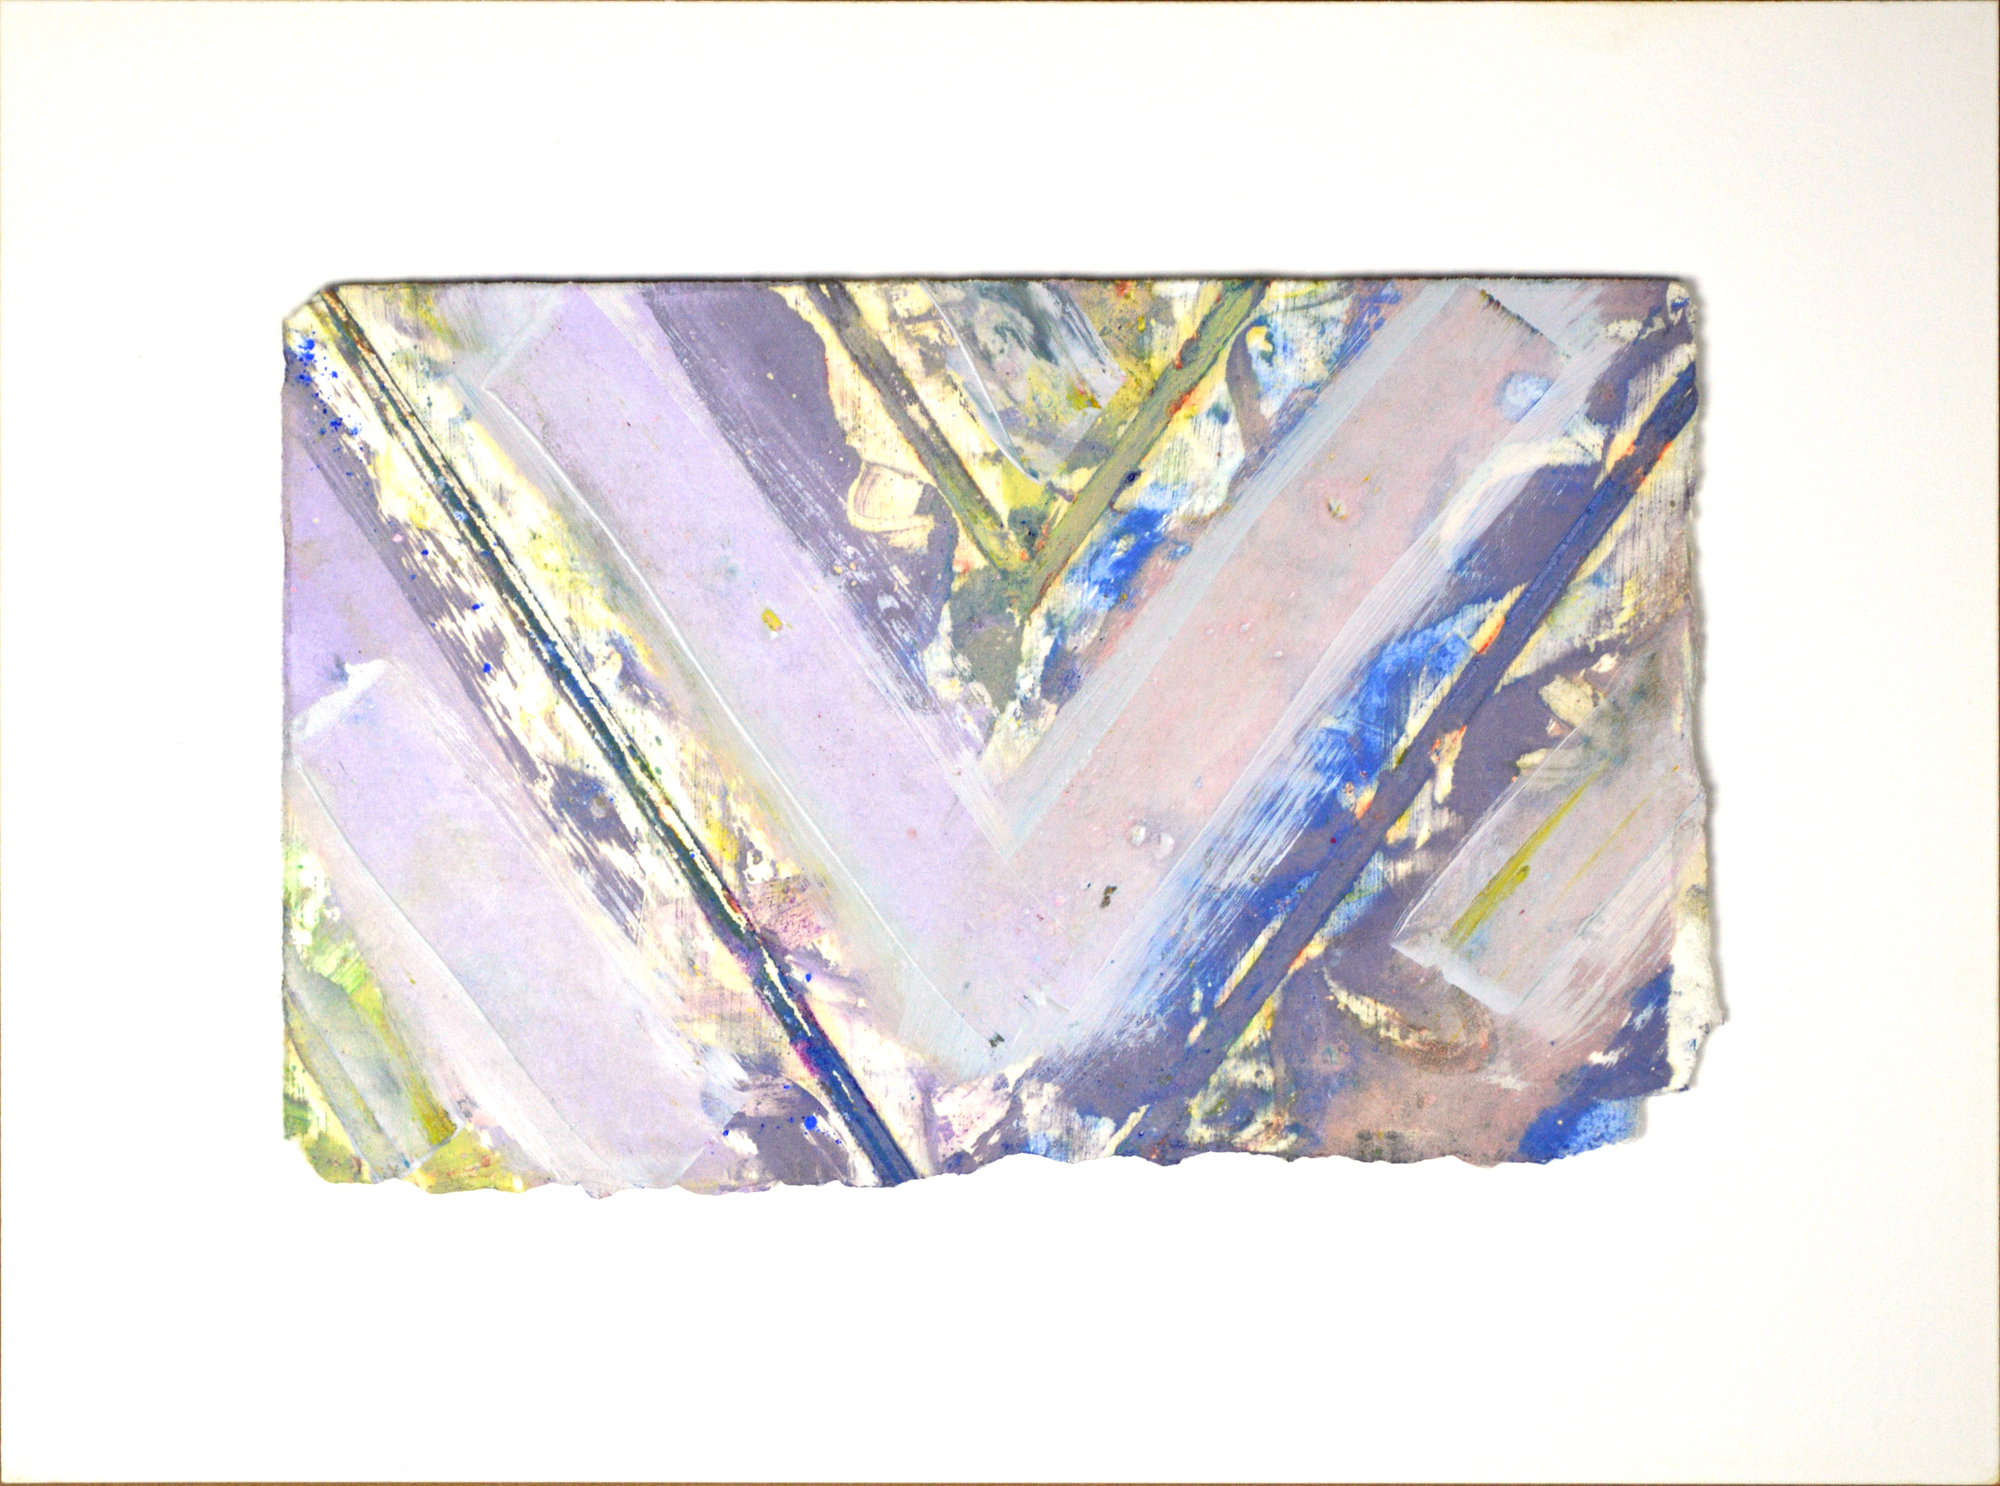 KENNETH NOLAND - Chevron - monotype on Japanese handmade paper mounted on board - 8 1/4 x 12 3/4 in.